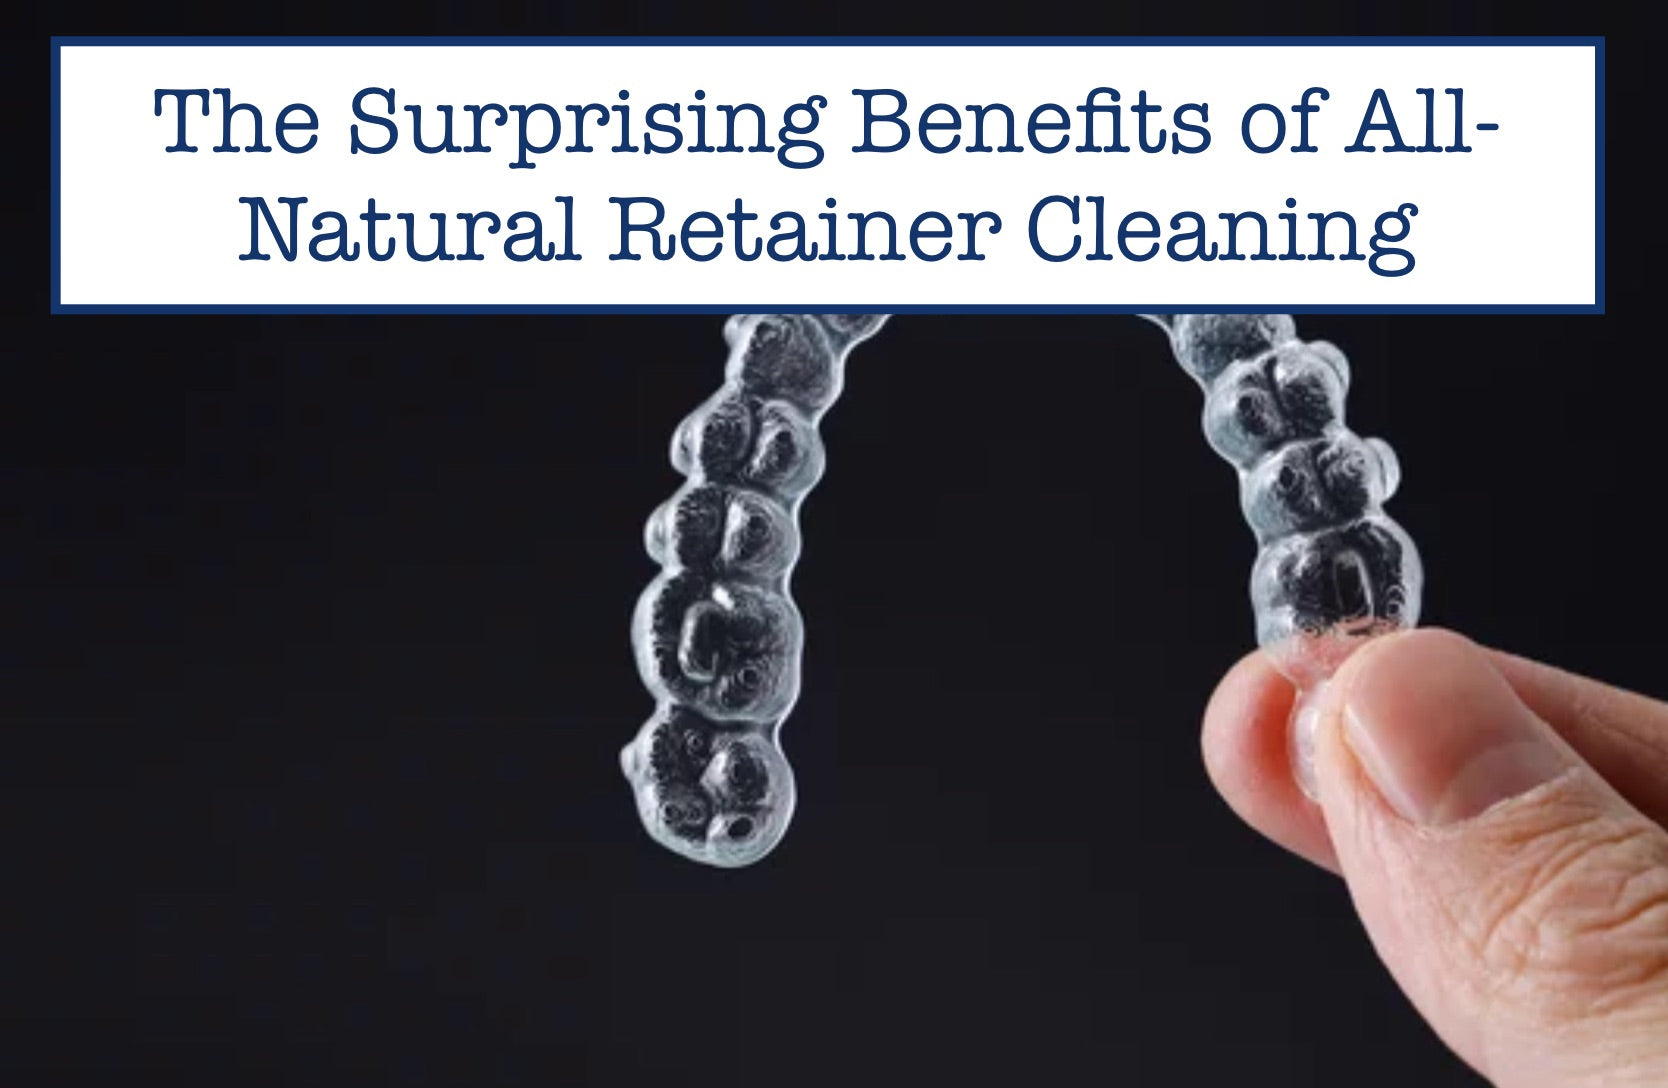 The Surprising Benefits of All-Natural Retainer Cleaning